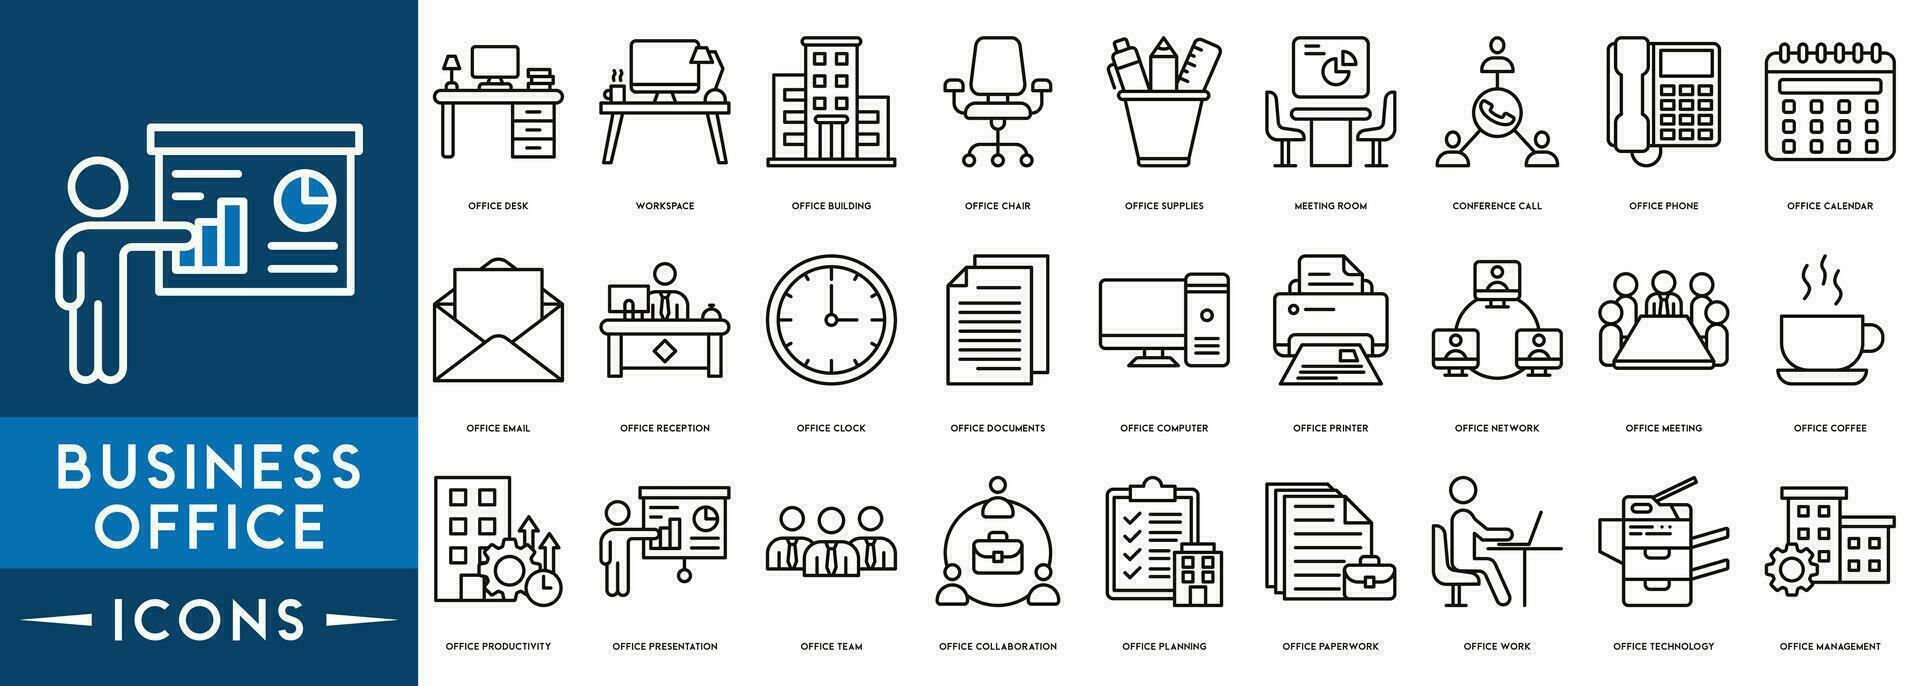 Business Office line icons set office communication documents, Collaboration, Planning, Paperwork, Work, Technology, Management, Office Productivity vector